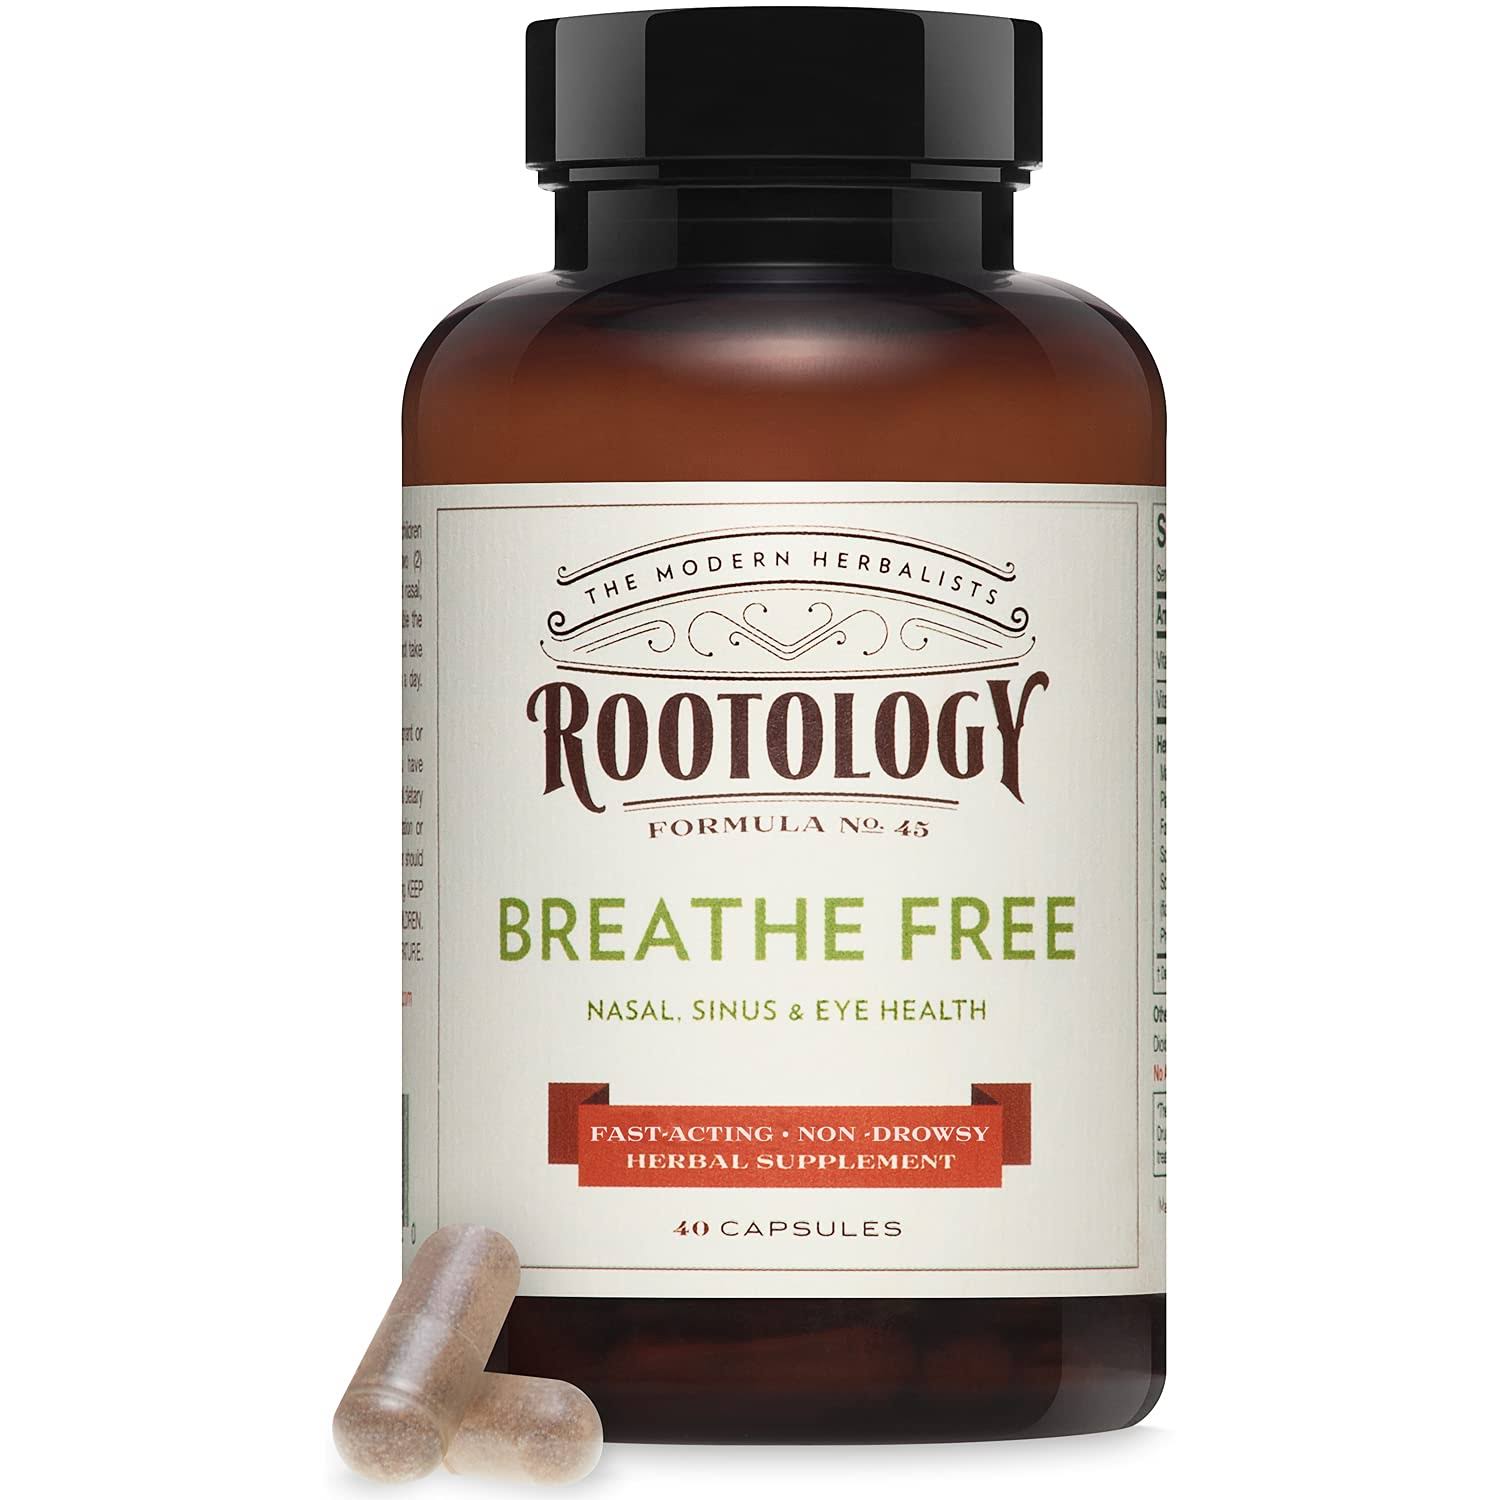 Rootology Breathe Free - Natural Nasal & Sinus Relief - Fast-Acting Non-Drowsy - 40 Capsules